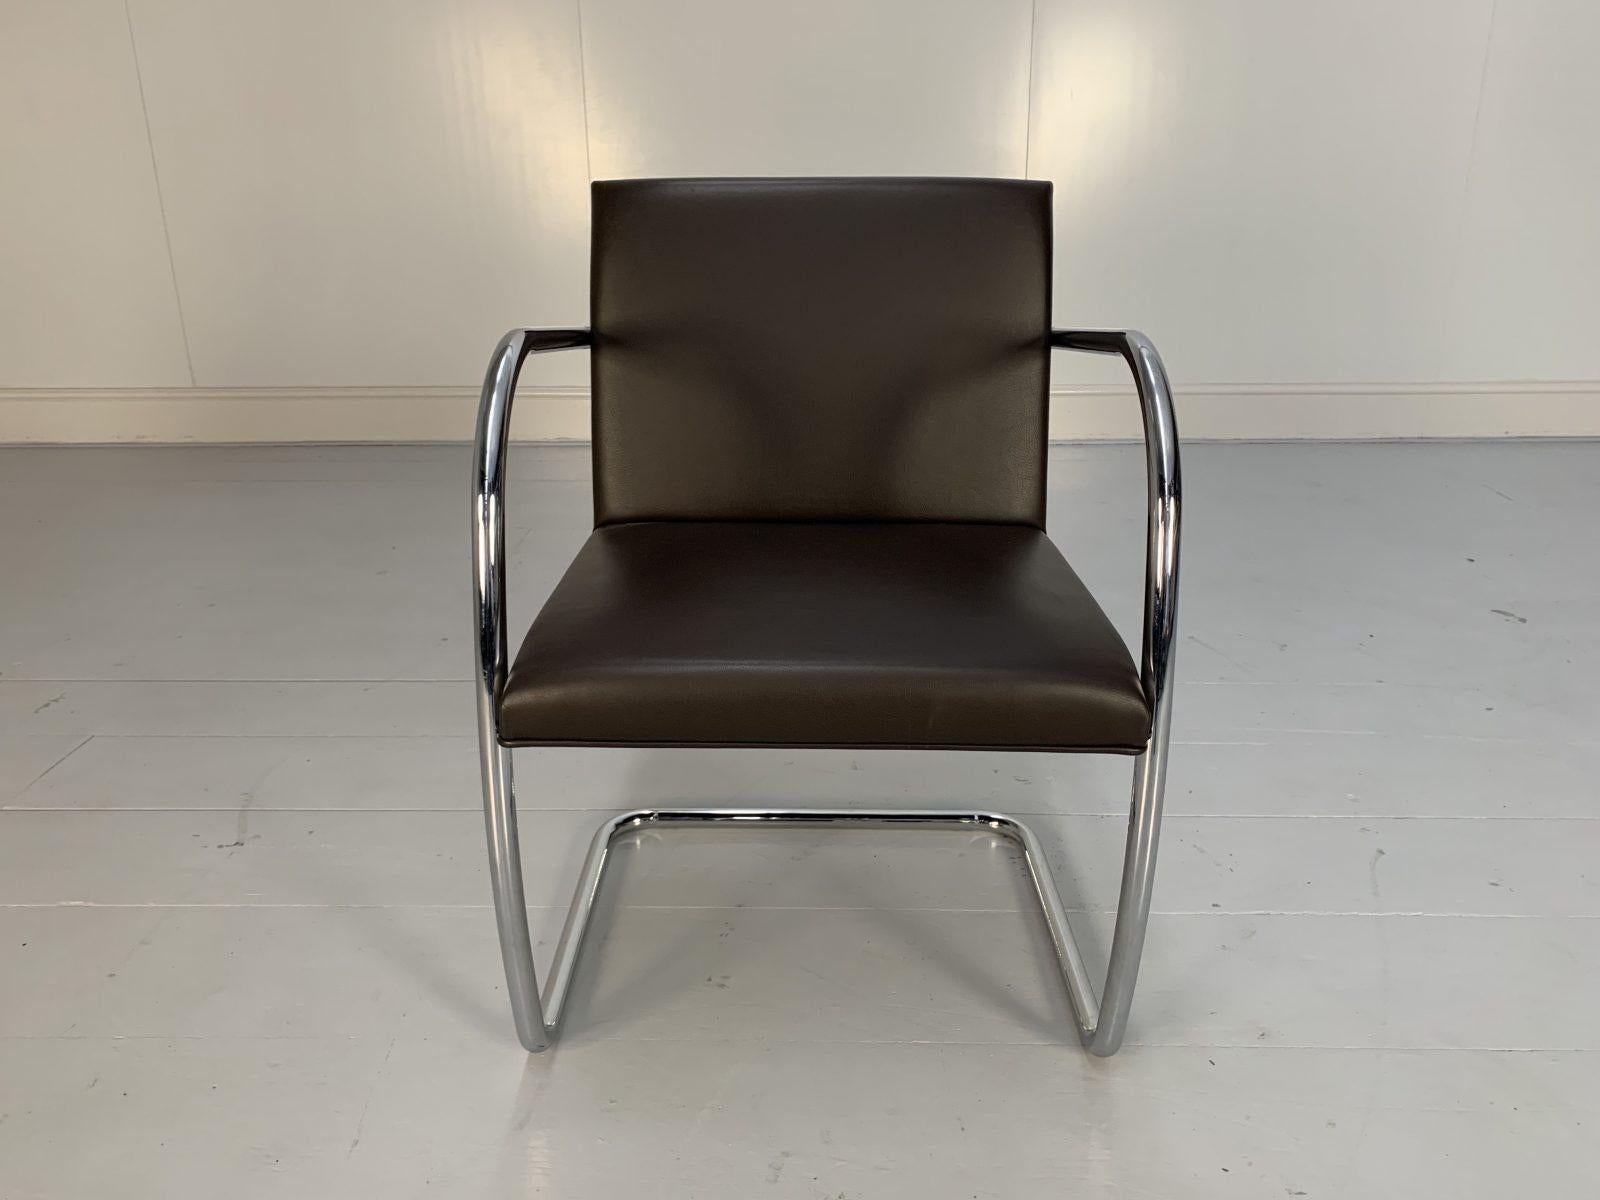 Contemporary Pair of Knoll Studio “Brno Tubular” Lounge Chair Armchairs in Dark Brown Leather For Sale